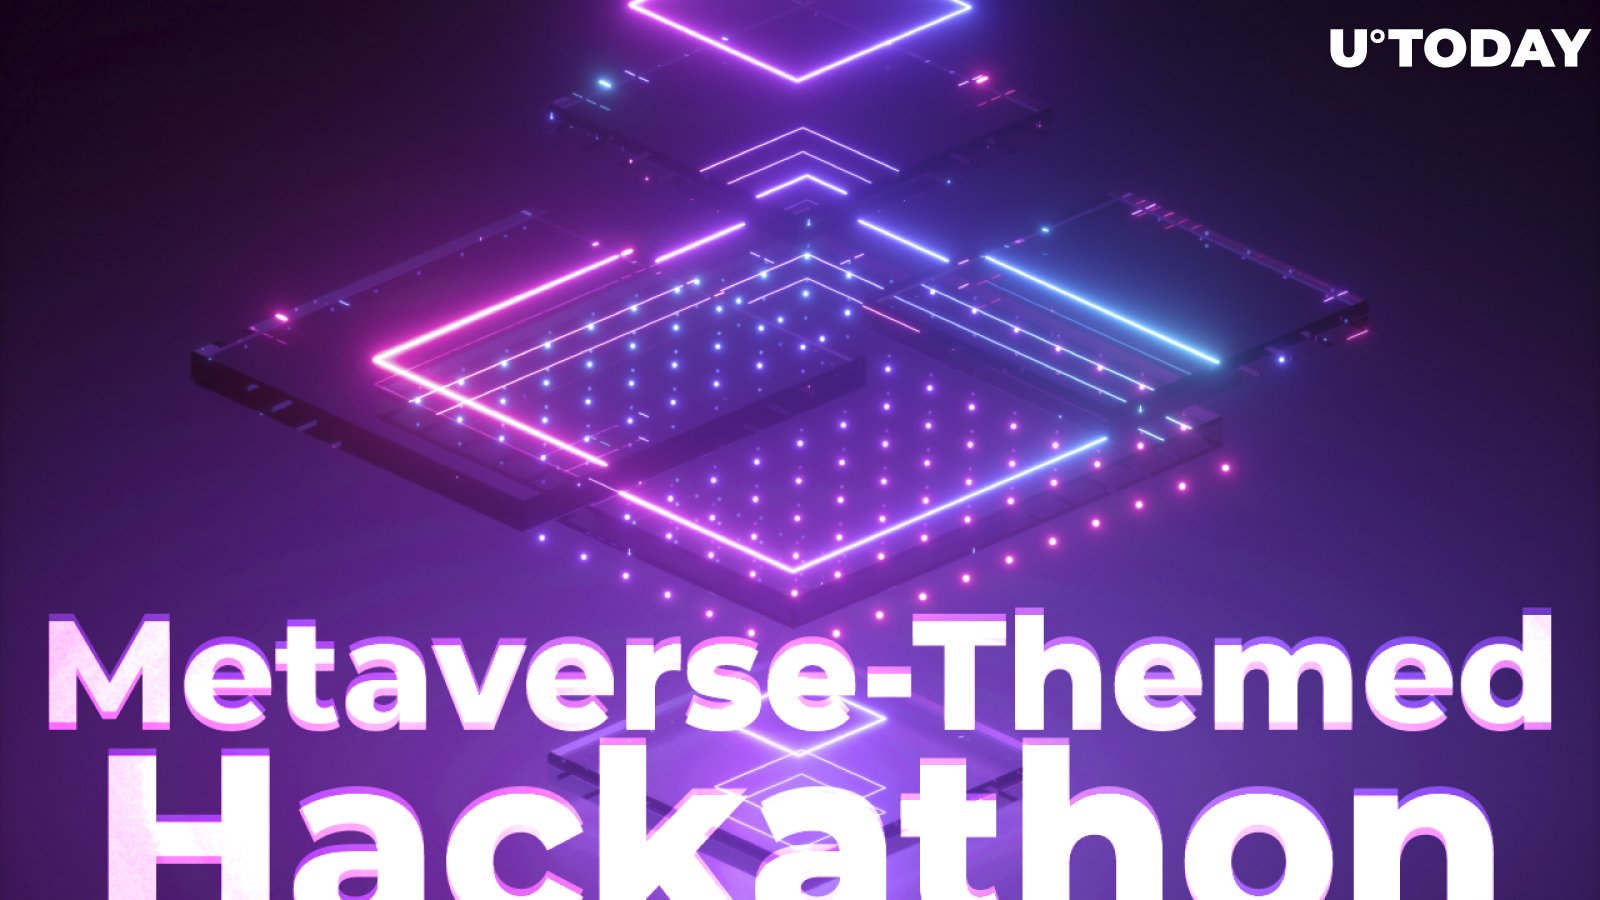 aelf Platform to Host Metaverse-Themed Hackathon, The Top of OASIS